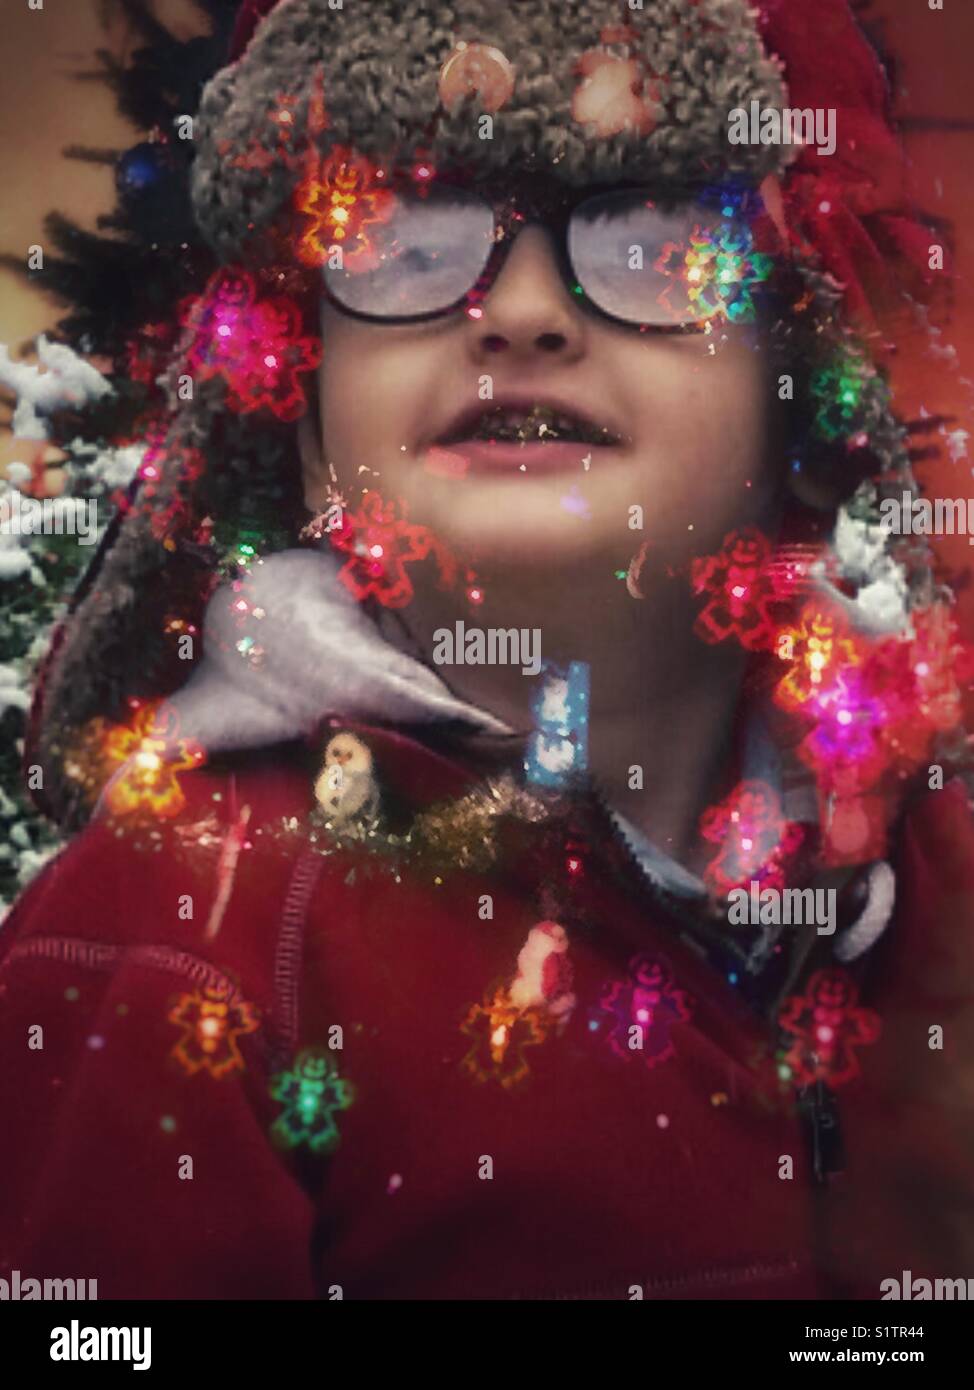 Dreams of sugarplums! Double exposure of child looking at snow falling and Christmas lights Stock Photo